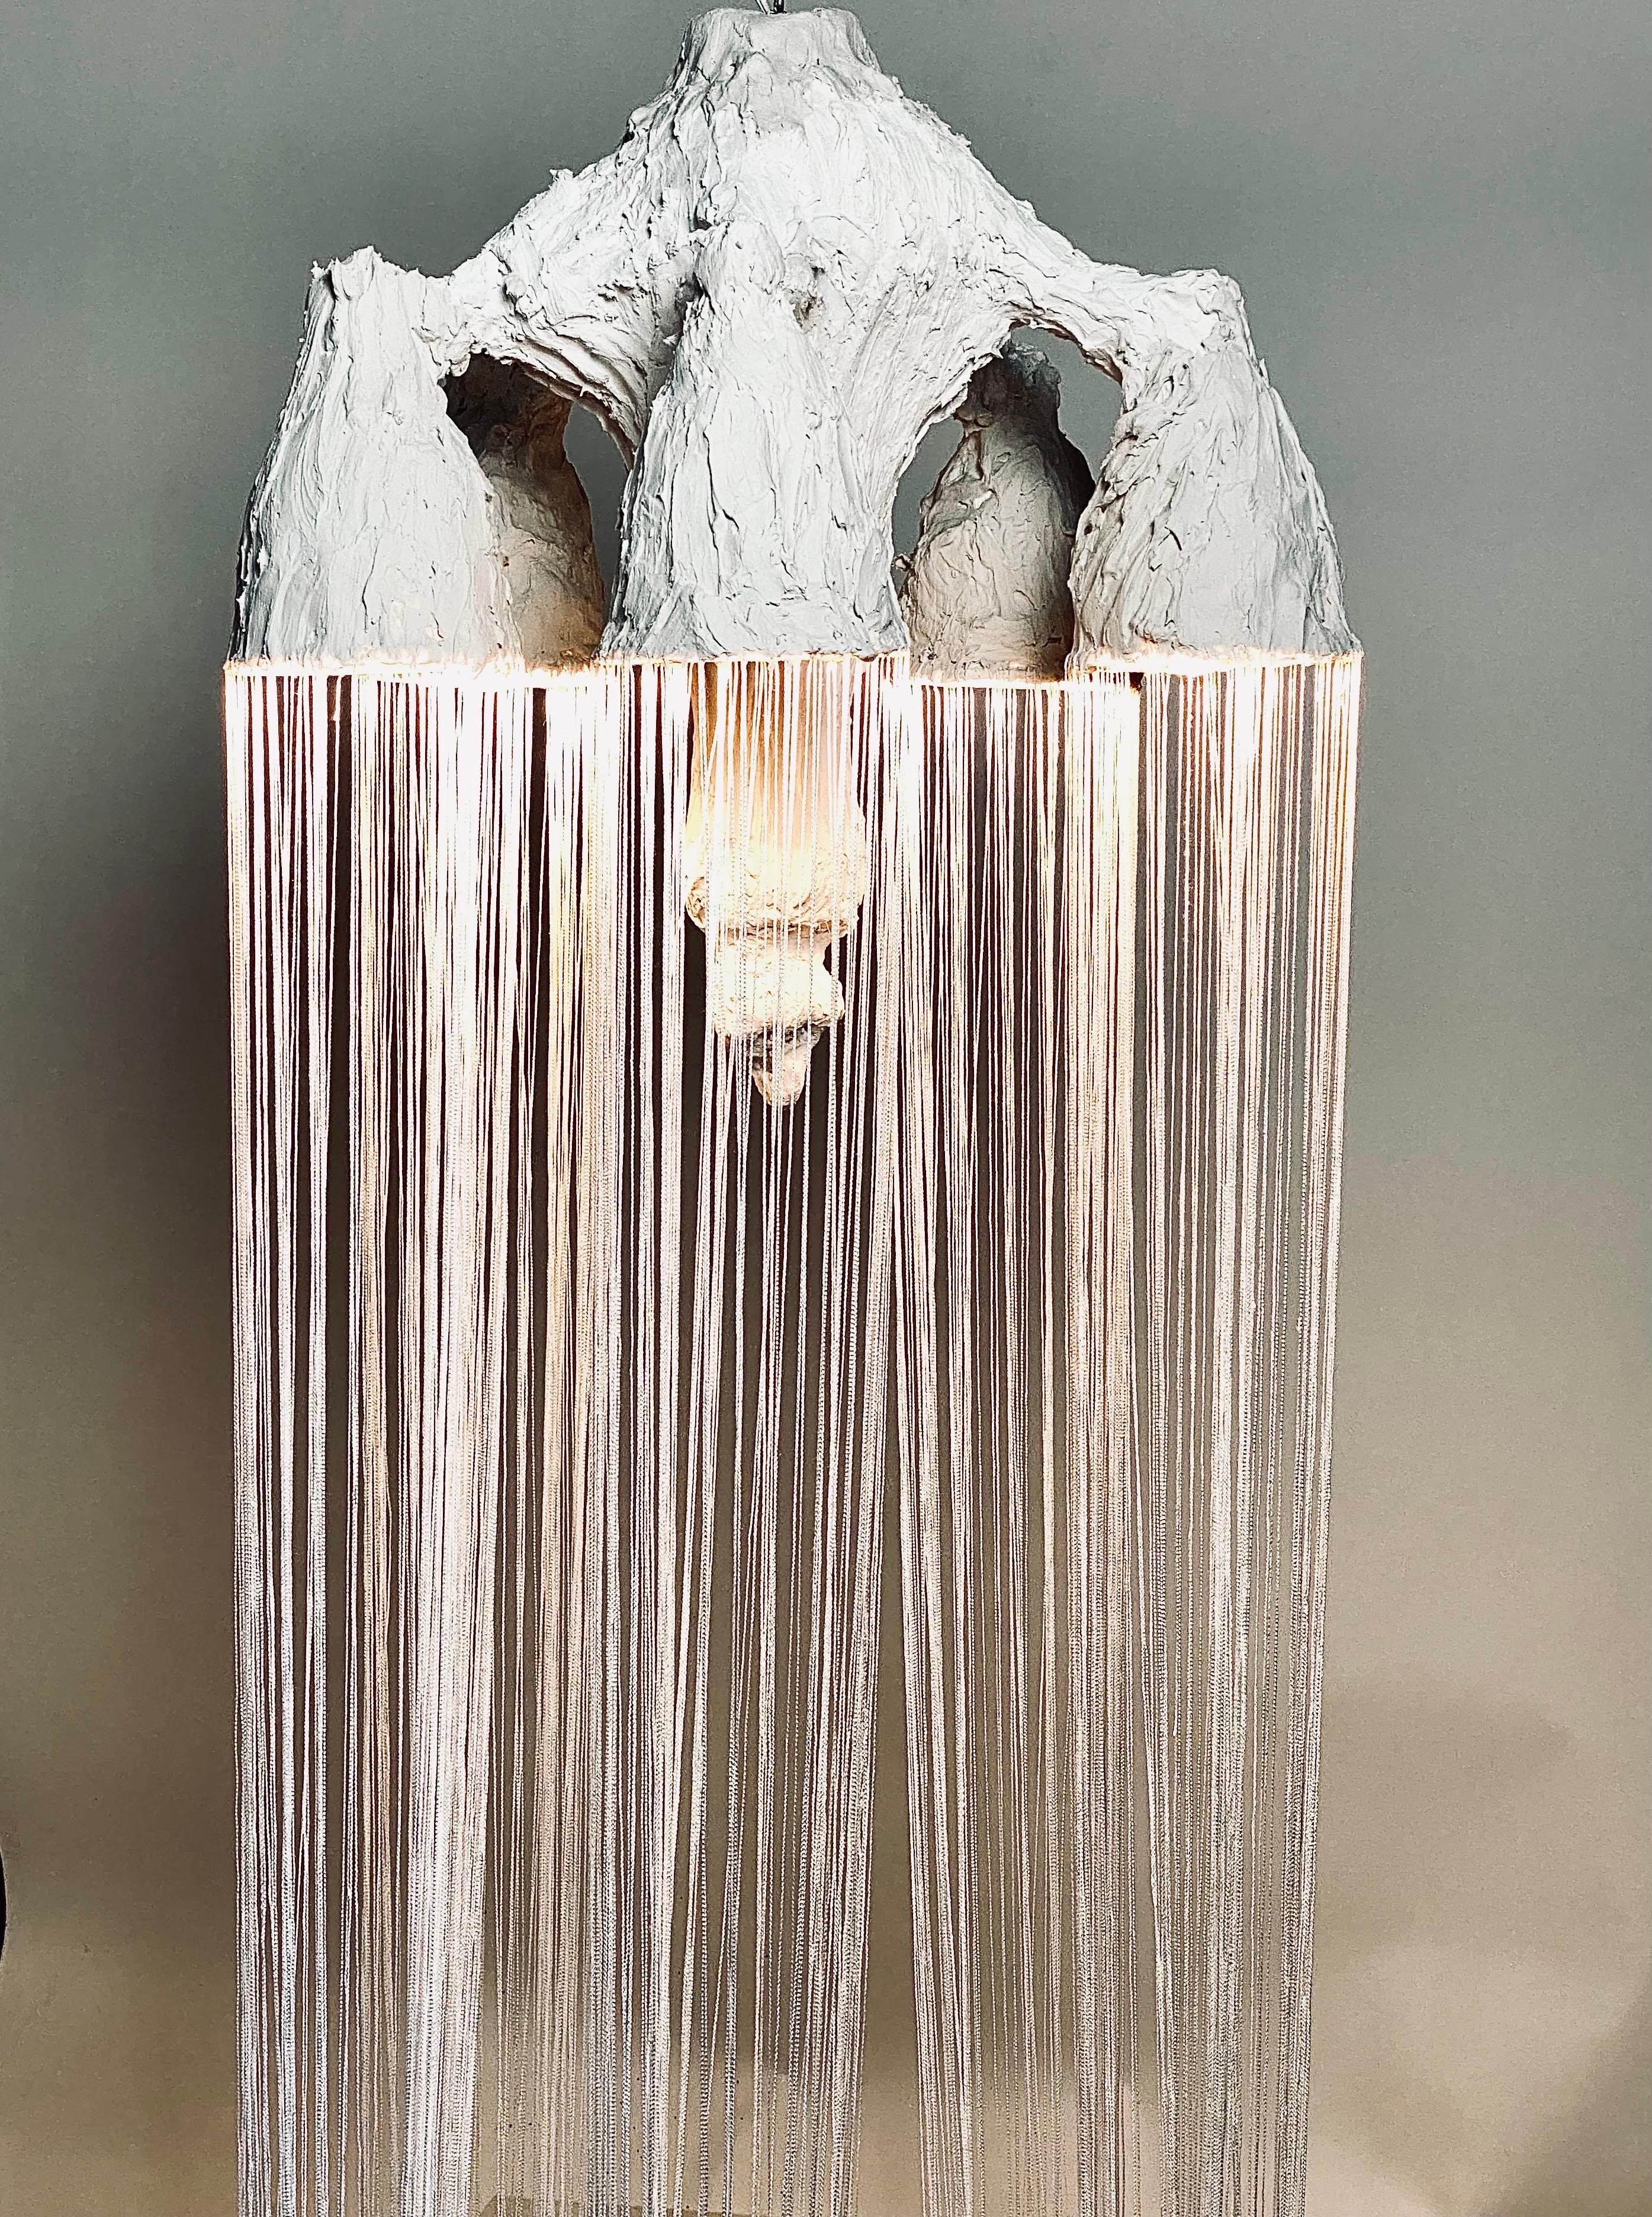 Hand-Crafted White Plaster Sculptural Pendant Chandelier, 21st Century by Mattia Biagi For Sale